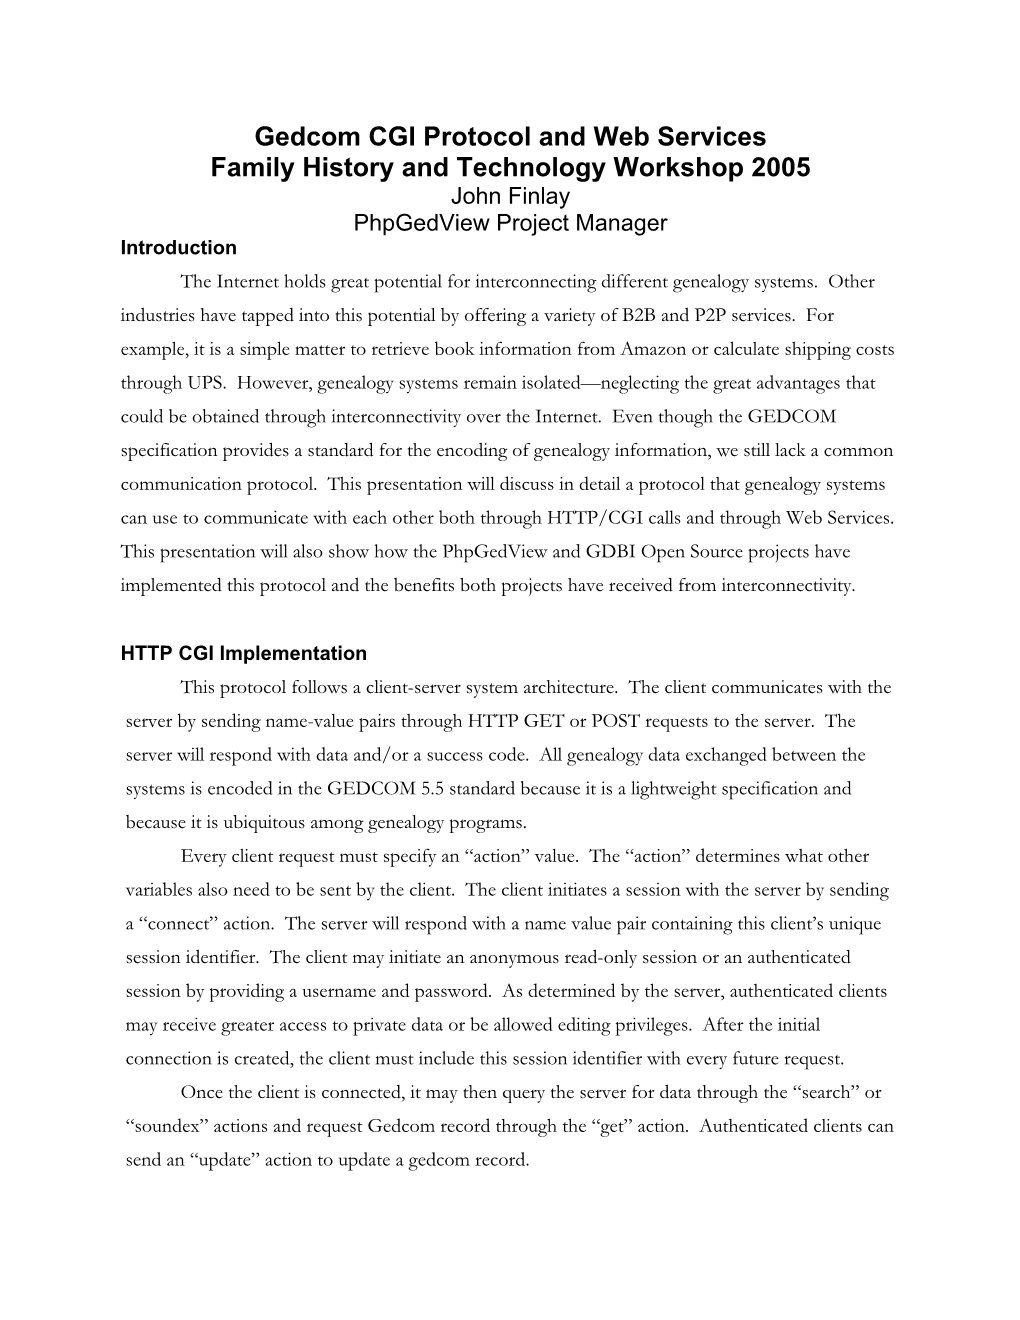 Family History and Technology Conference 2005